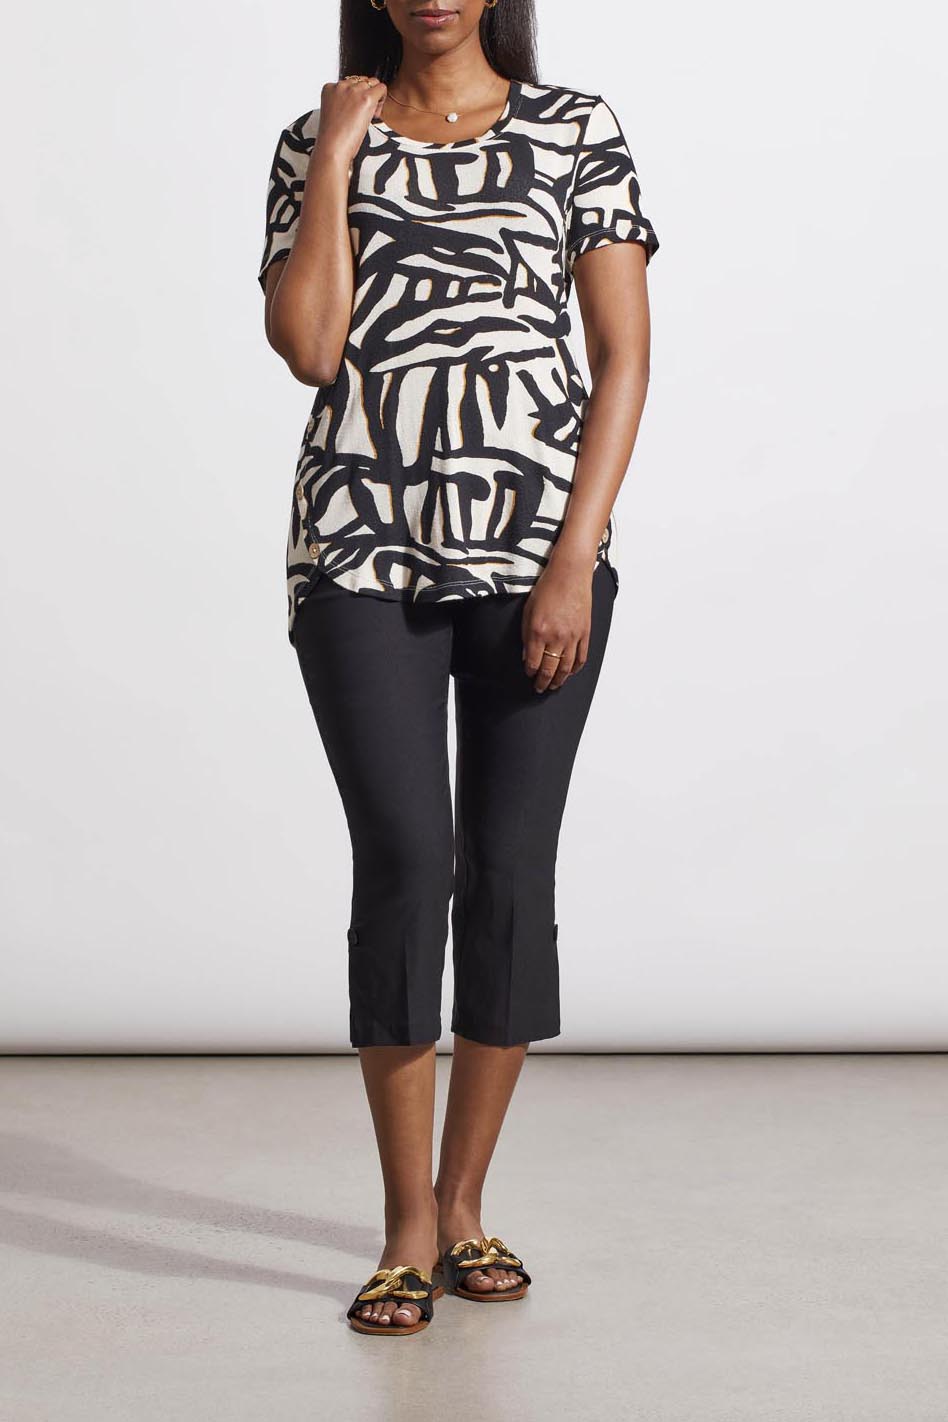 A woman stands wearing a Tribal crew neck top with buttons crafted from the finest materials, cropped black pants, and patterned sandals.